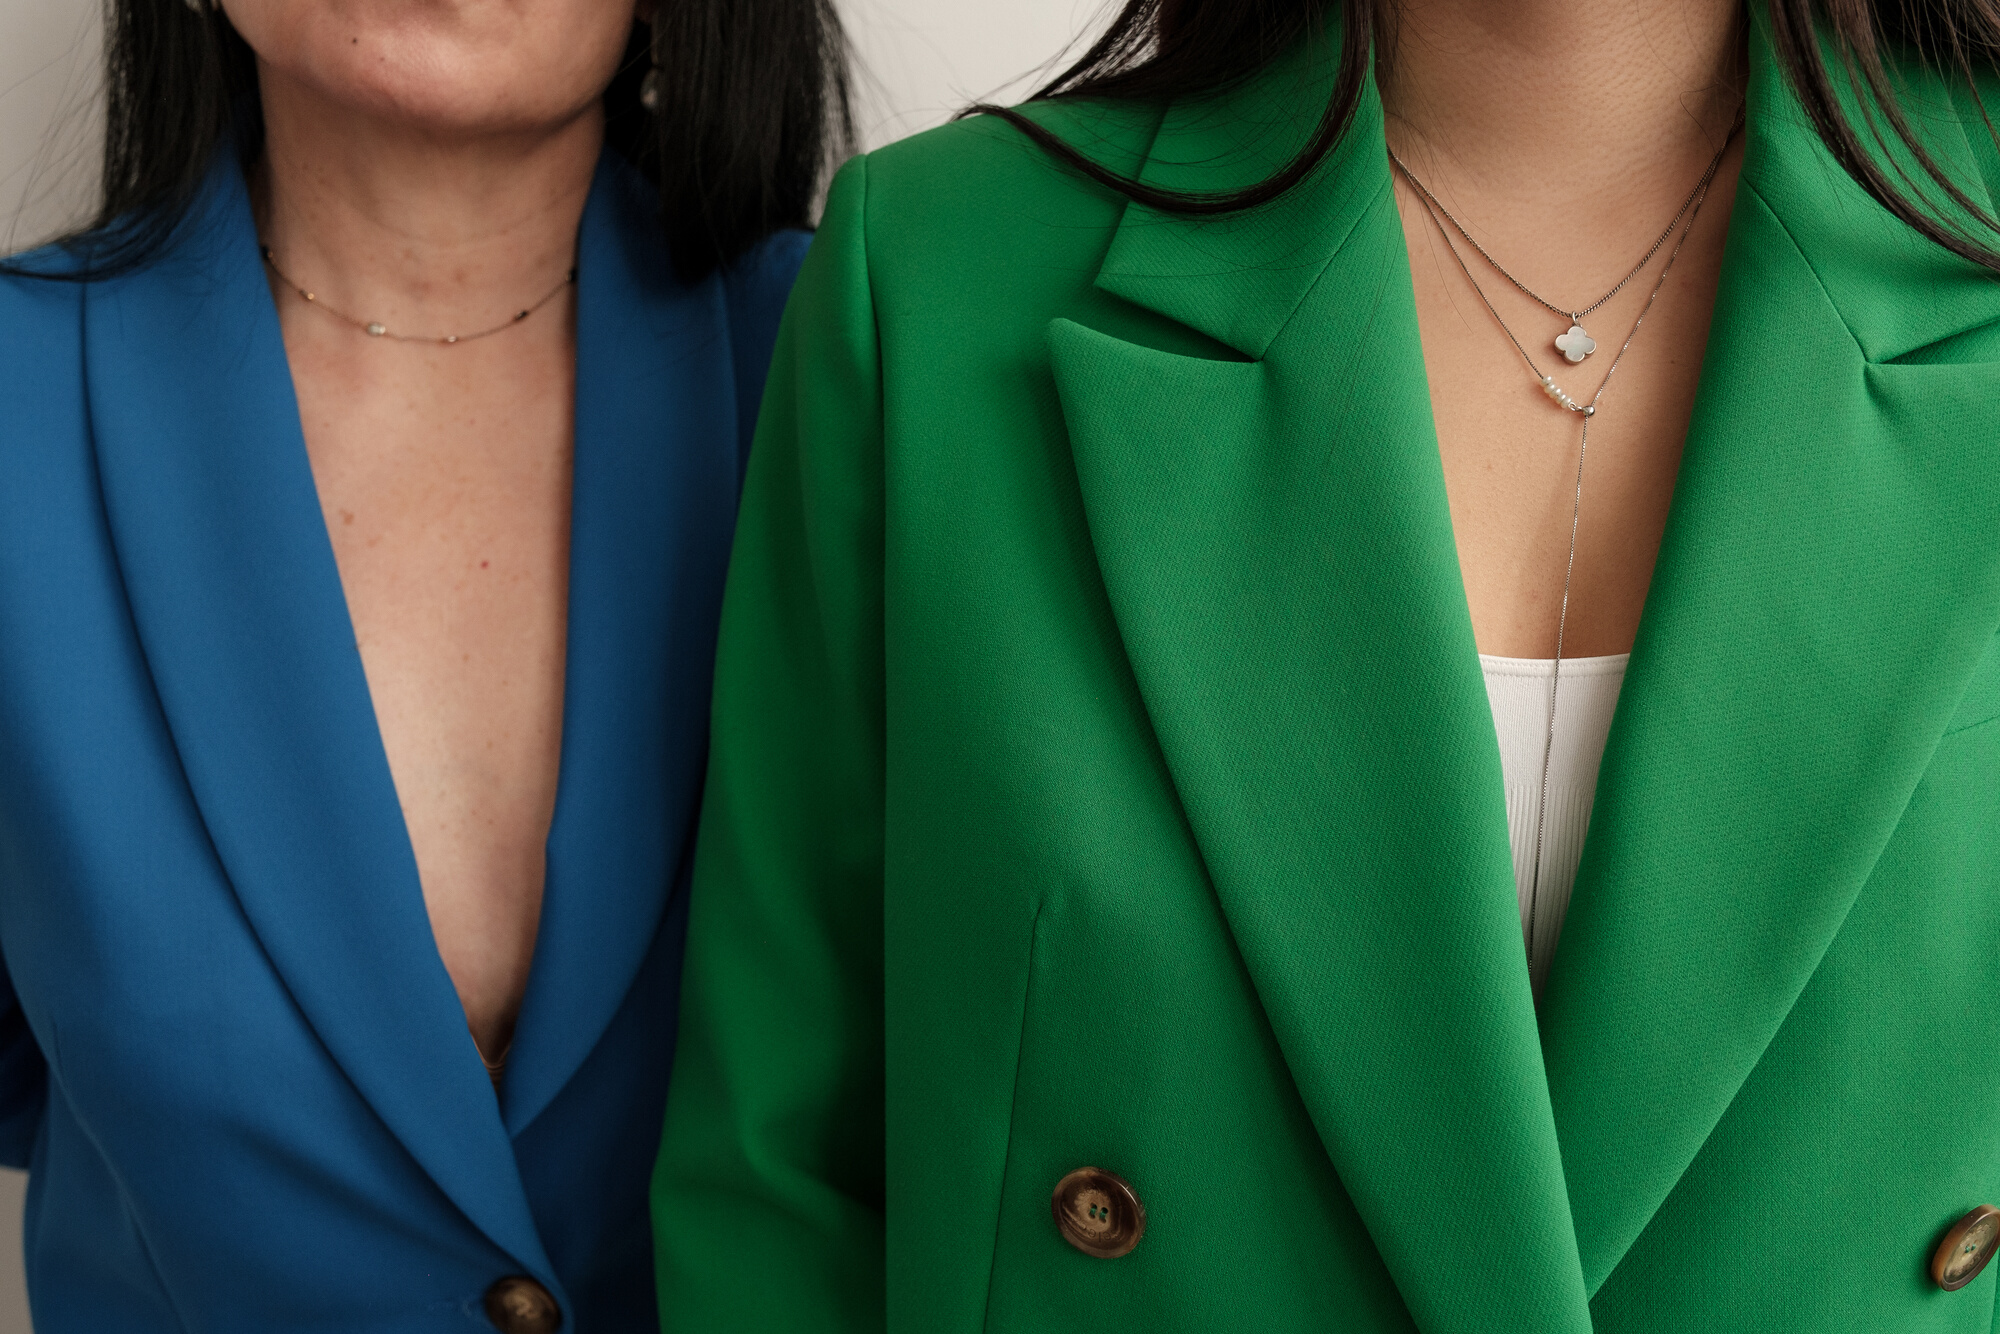 Mom and Daughter in Matching Elegant Suits